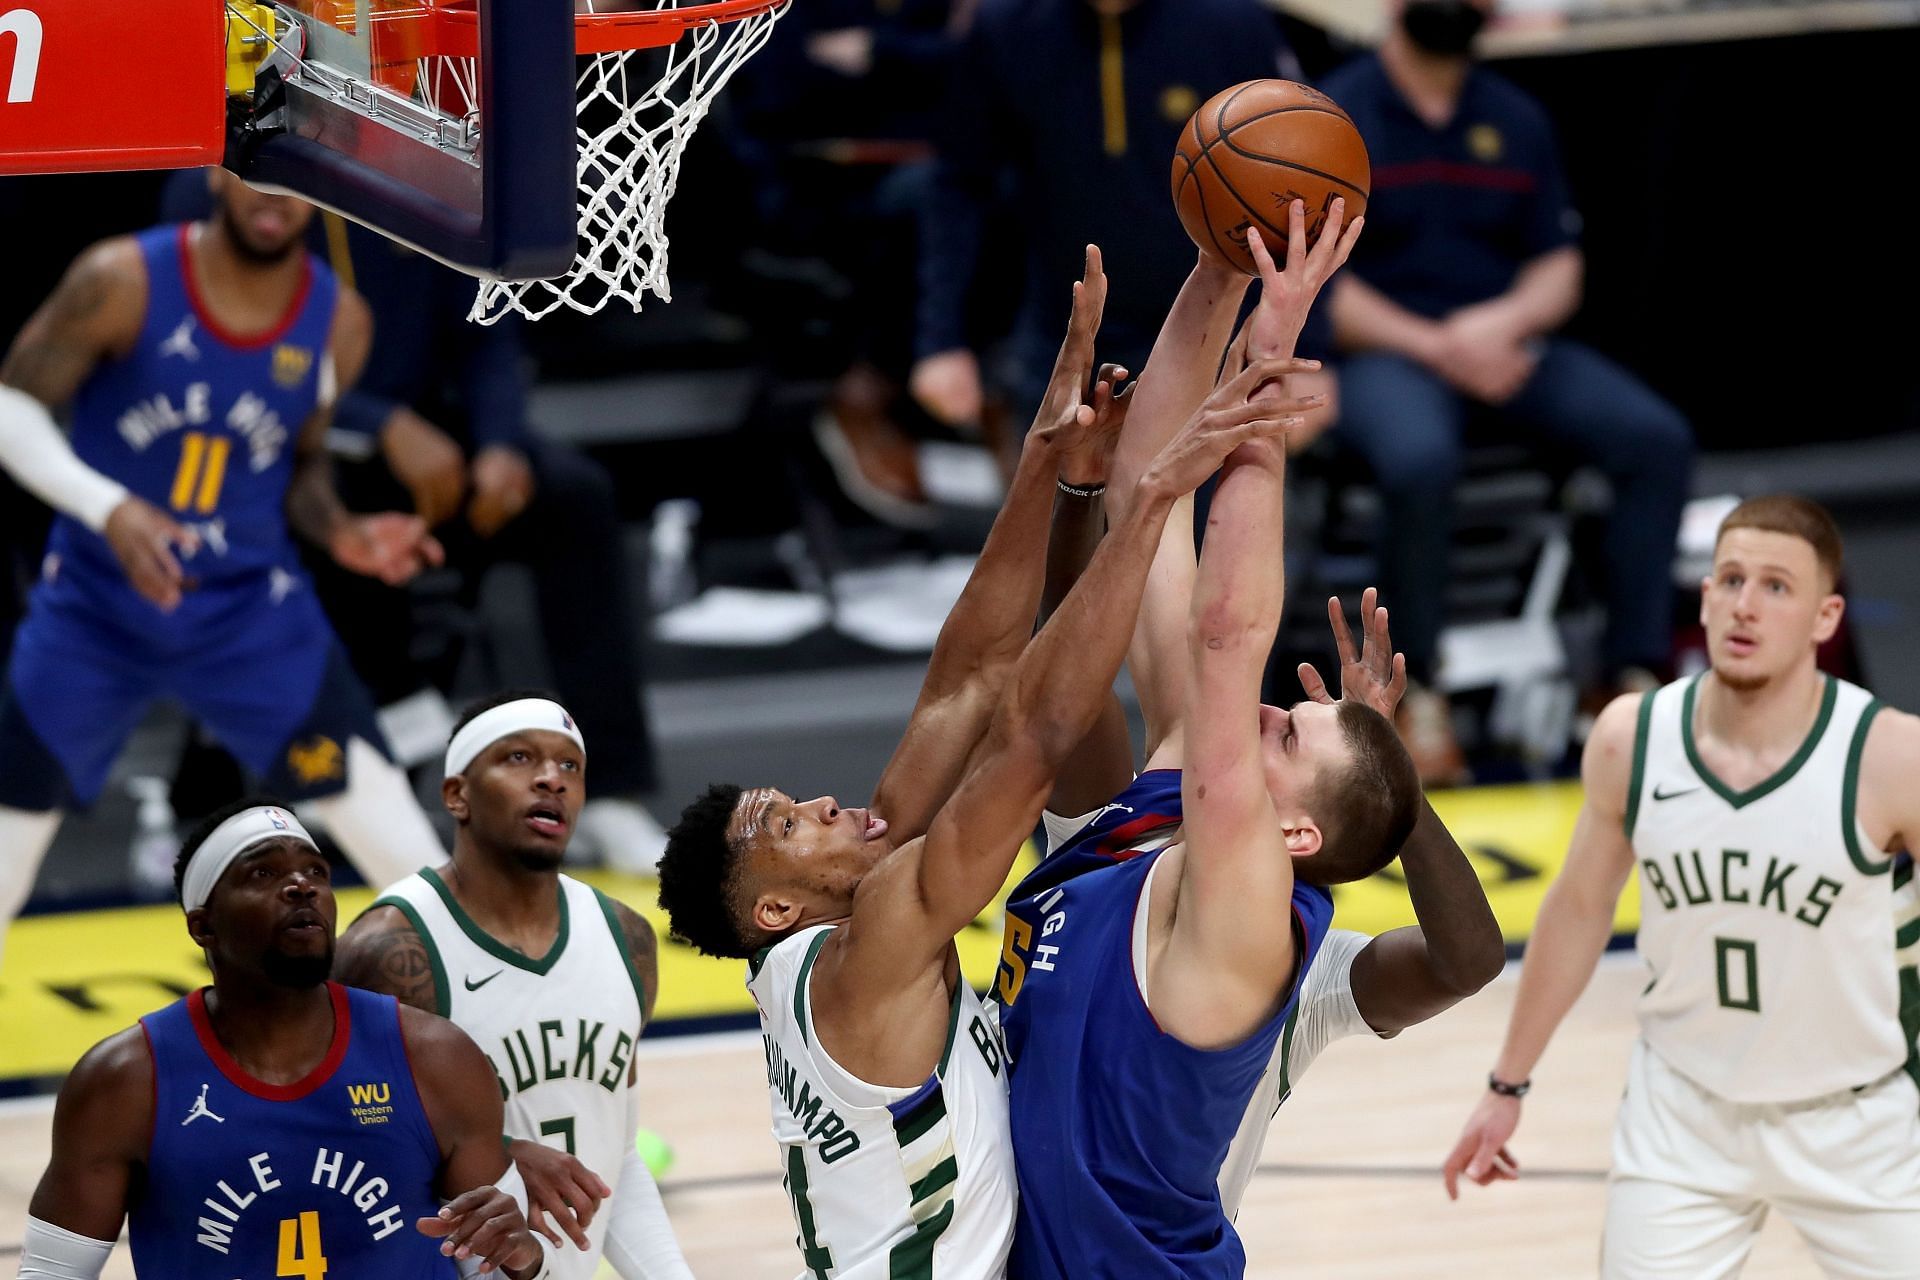 Nikola Jokic of the Denver Nuggets is stopped going to the basket by Giannis Antetokounmpo.